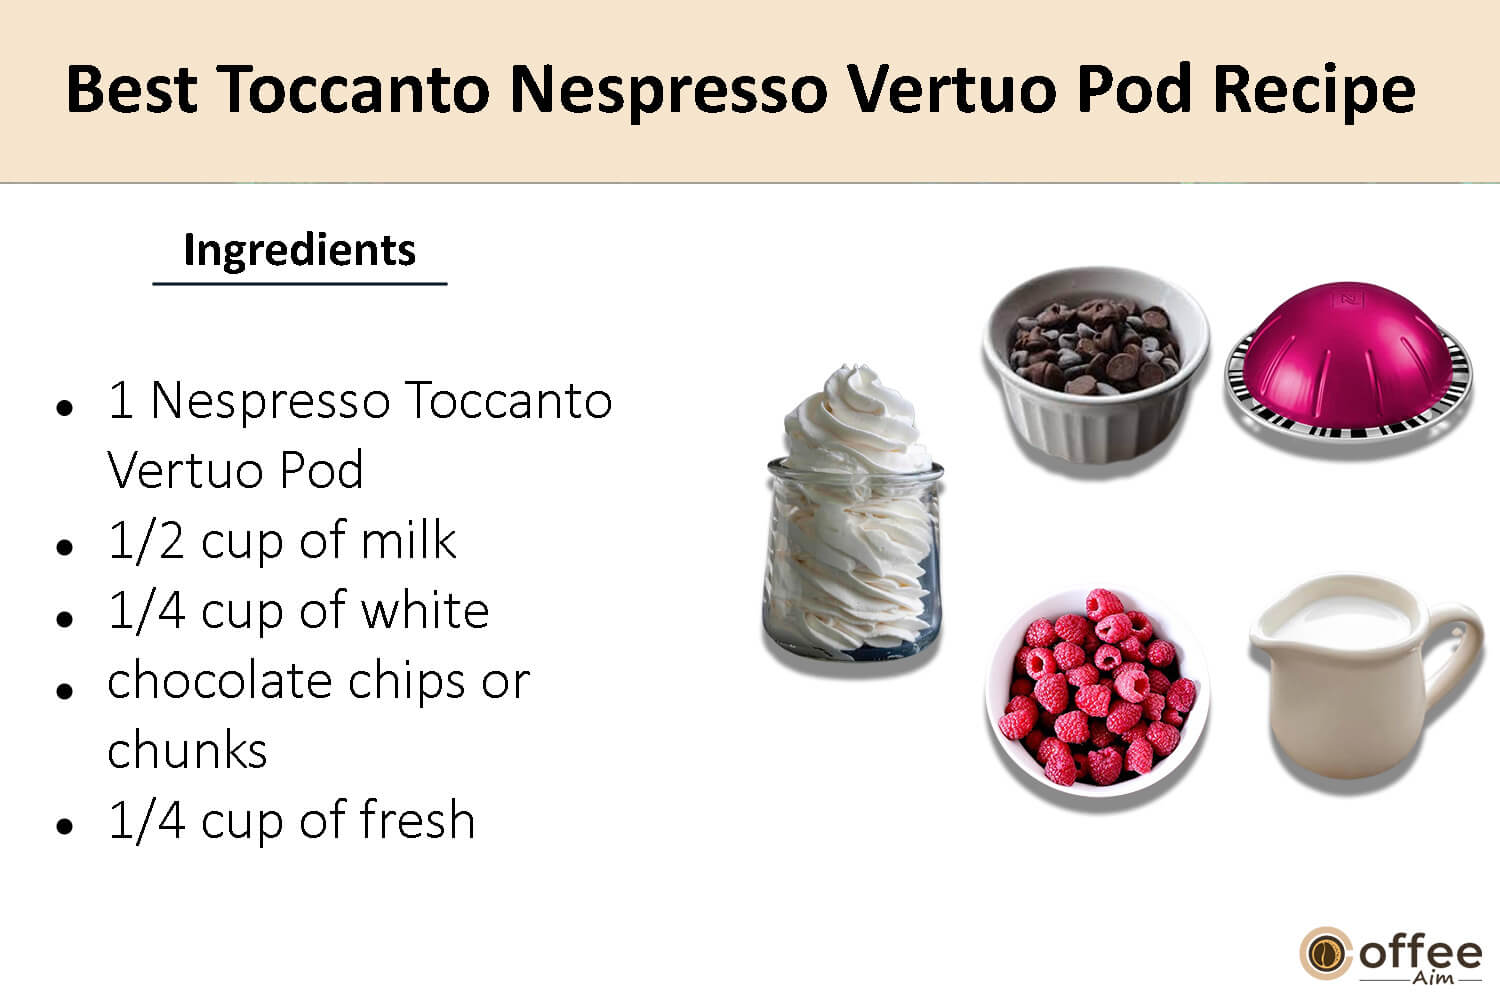 In this image, I elucidate the components that comprise the finest Toccanto Nespresso Vertuo coffee pod.